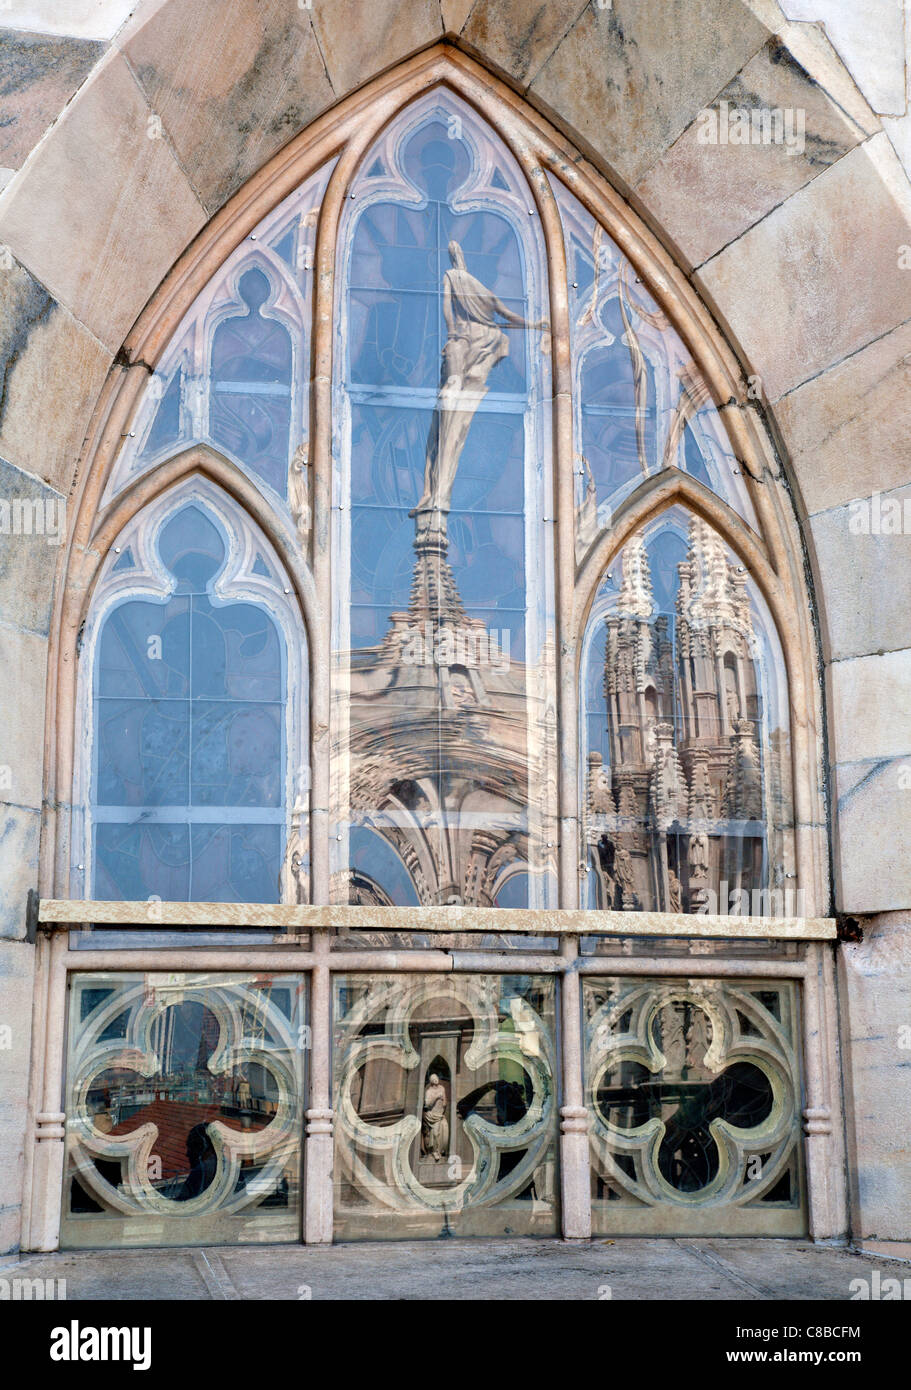 Milan - gothic gothic window from roof of Duomo cathedral Stock Photo